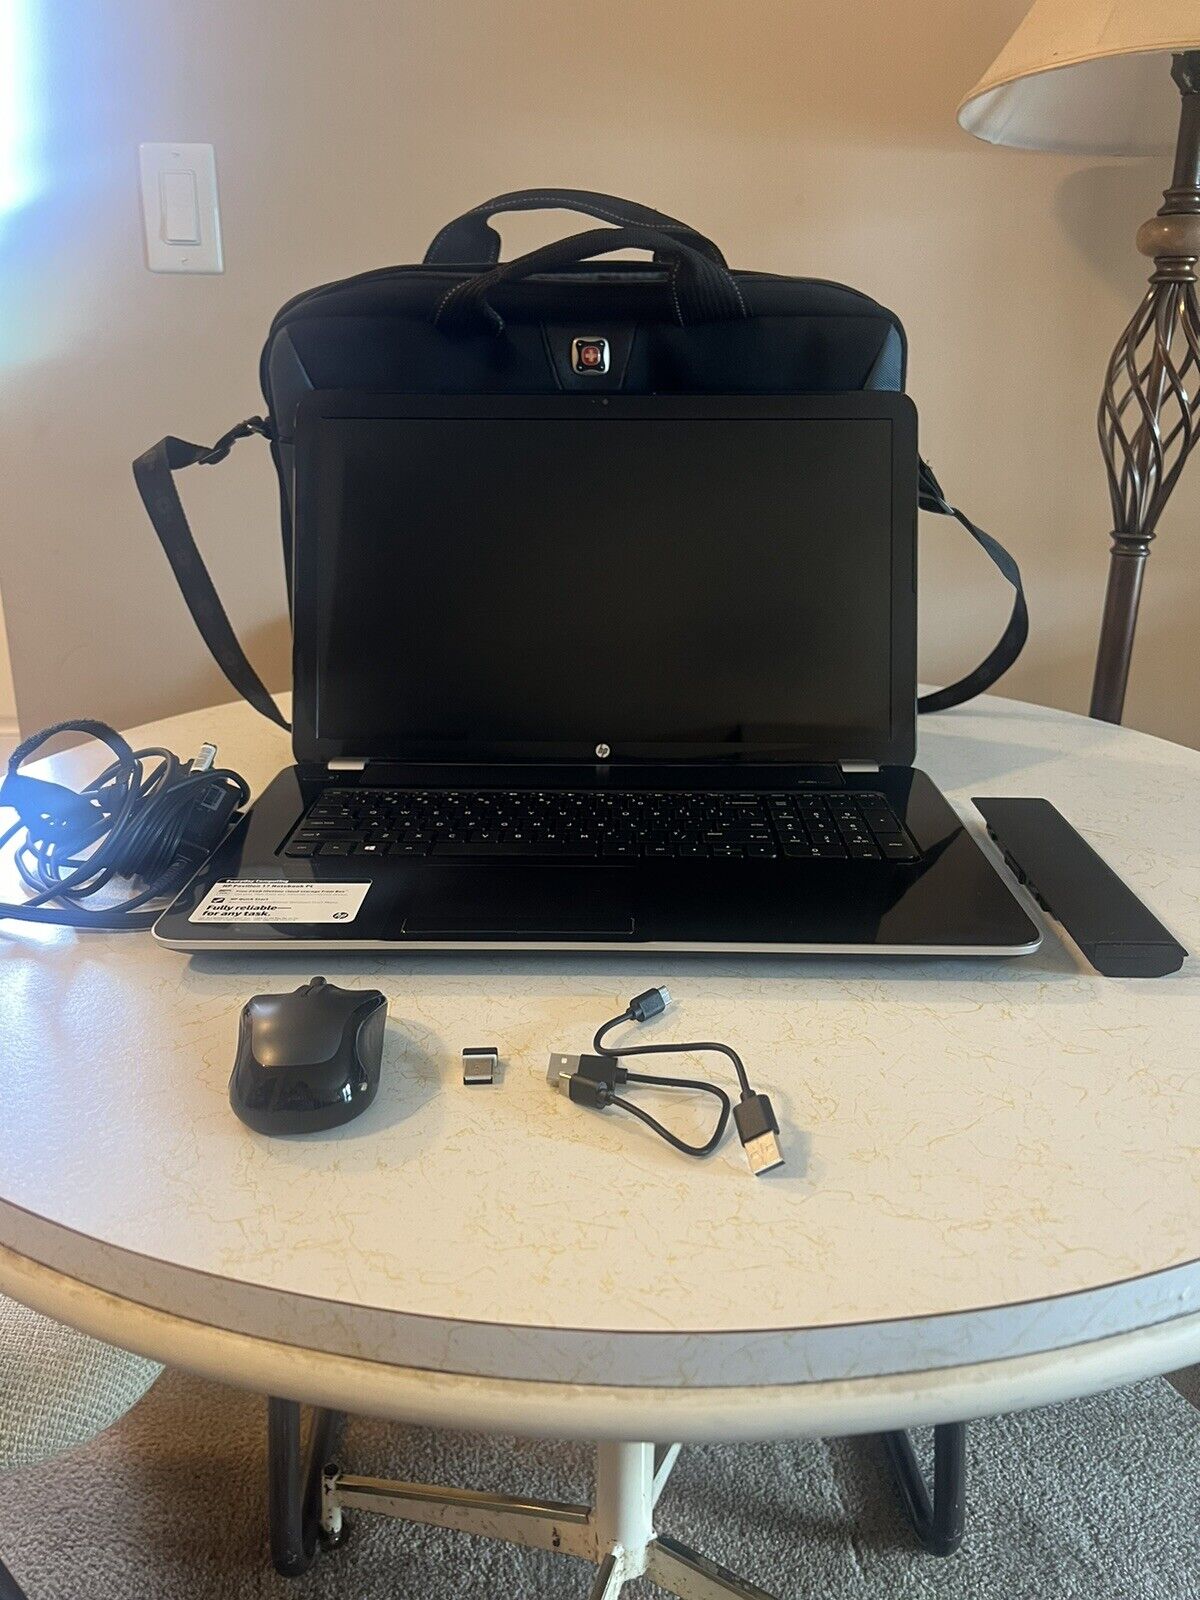 HP Pavilion 17 Laptop and HP Officejet Pro 8610 Printer with Acessories